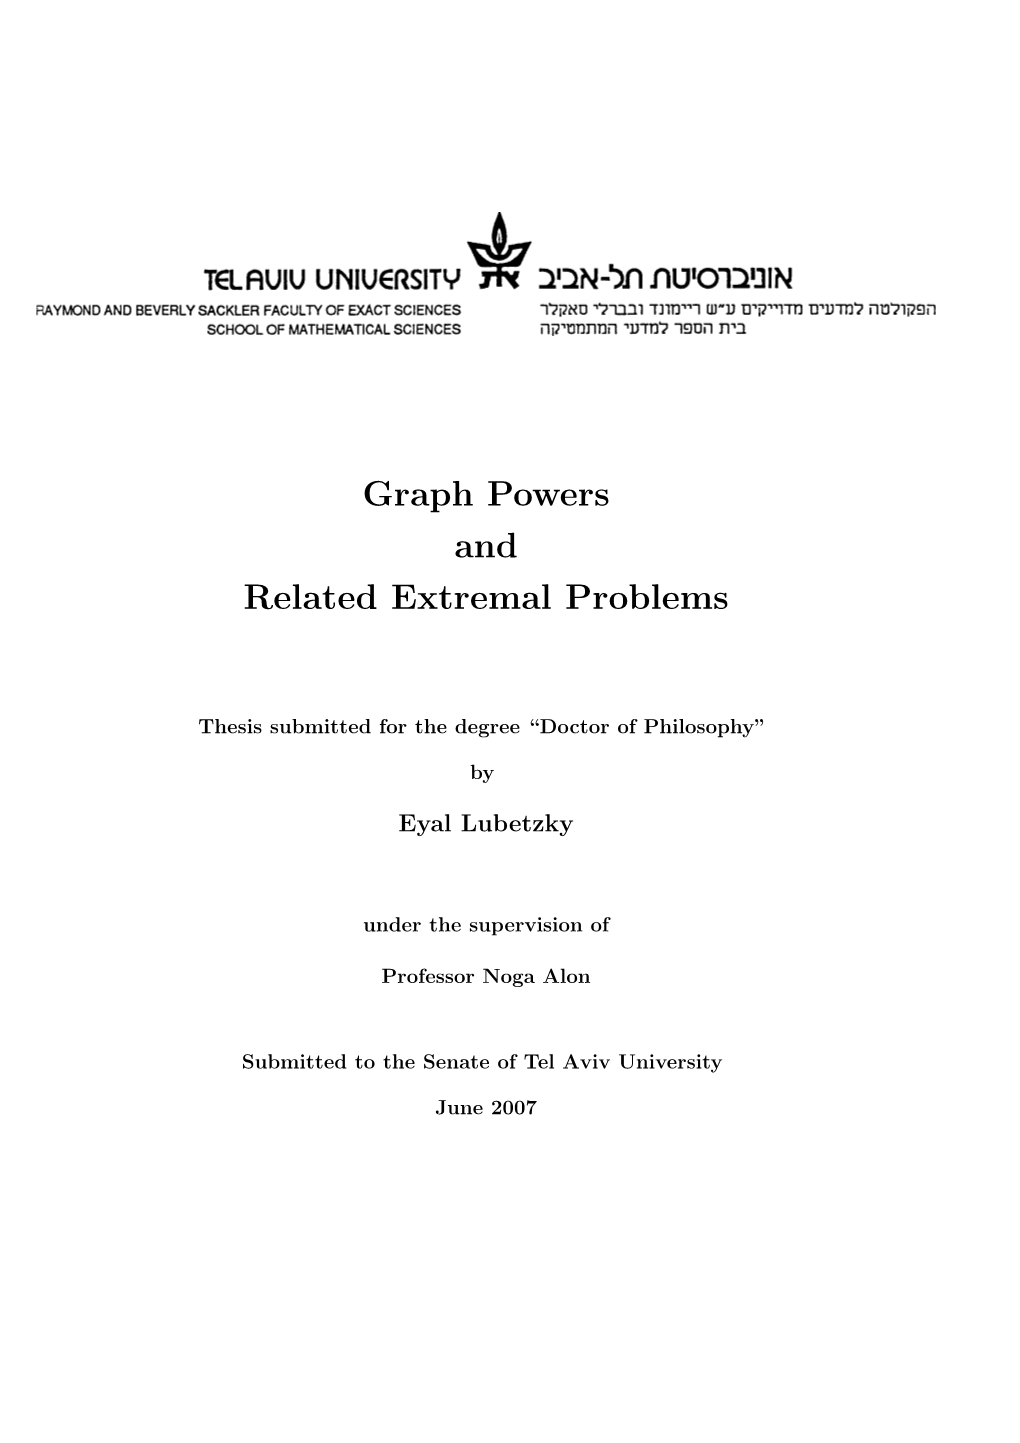 Graph Powers and Related Extremal Problems (Eyal Lubetzky, Ph.D. Thesis)